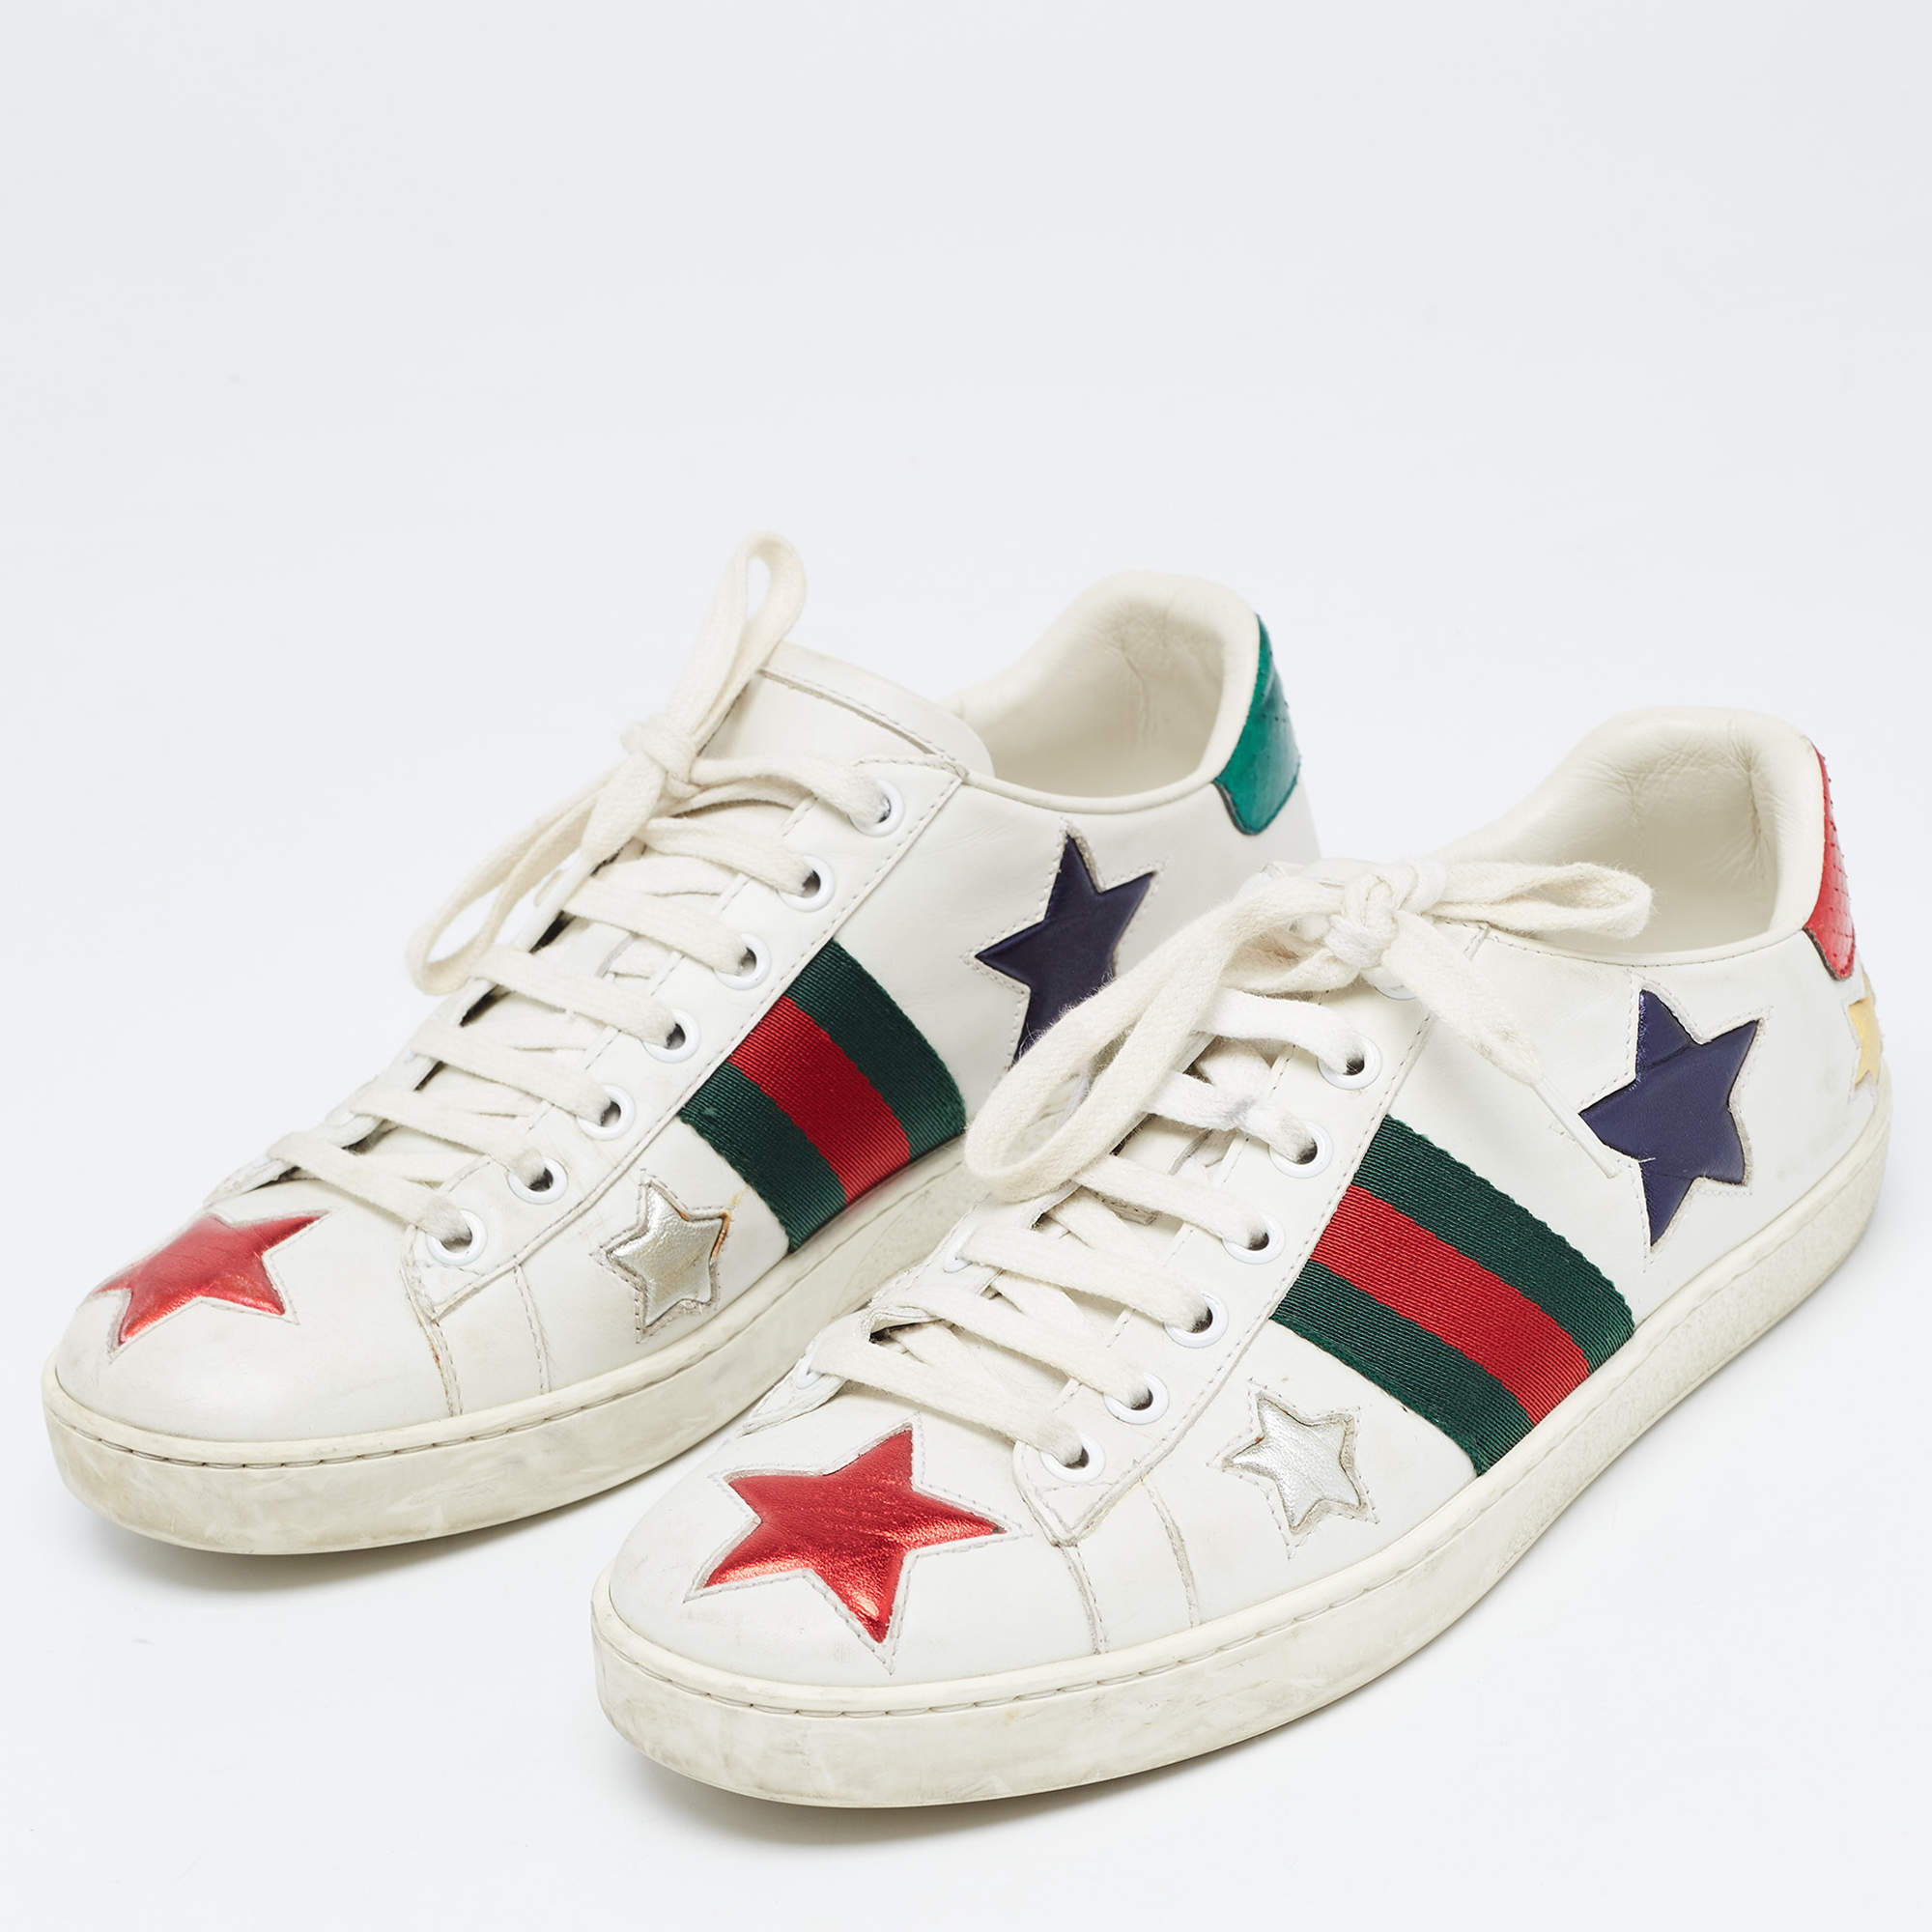 My Gucci Ace Sneakers Review - Mia Mia Mine | Casual shoes outfit, Gucci  ace sneakers, Gucci sneakers outfit